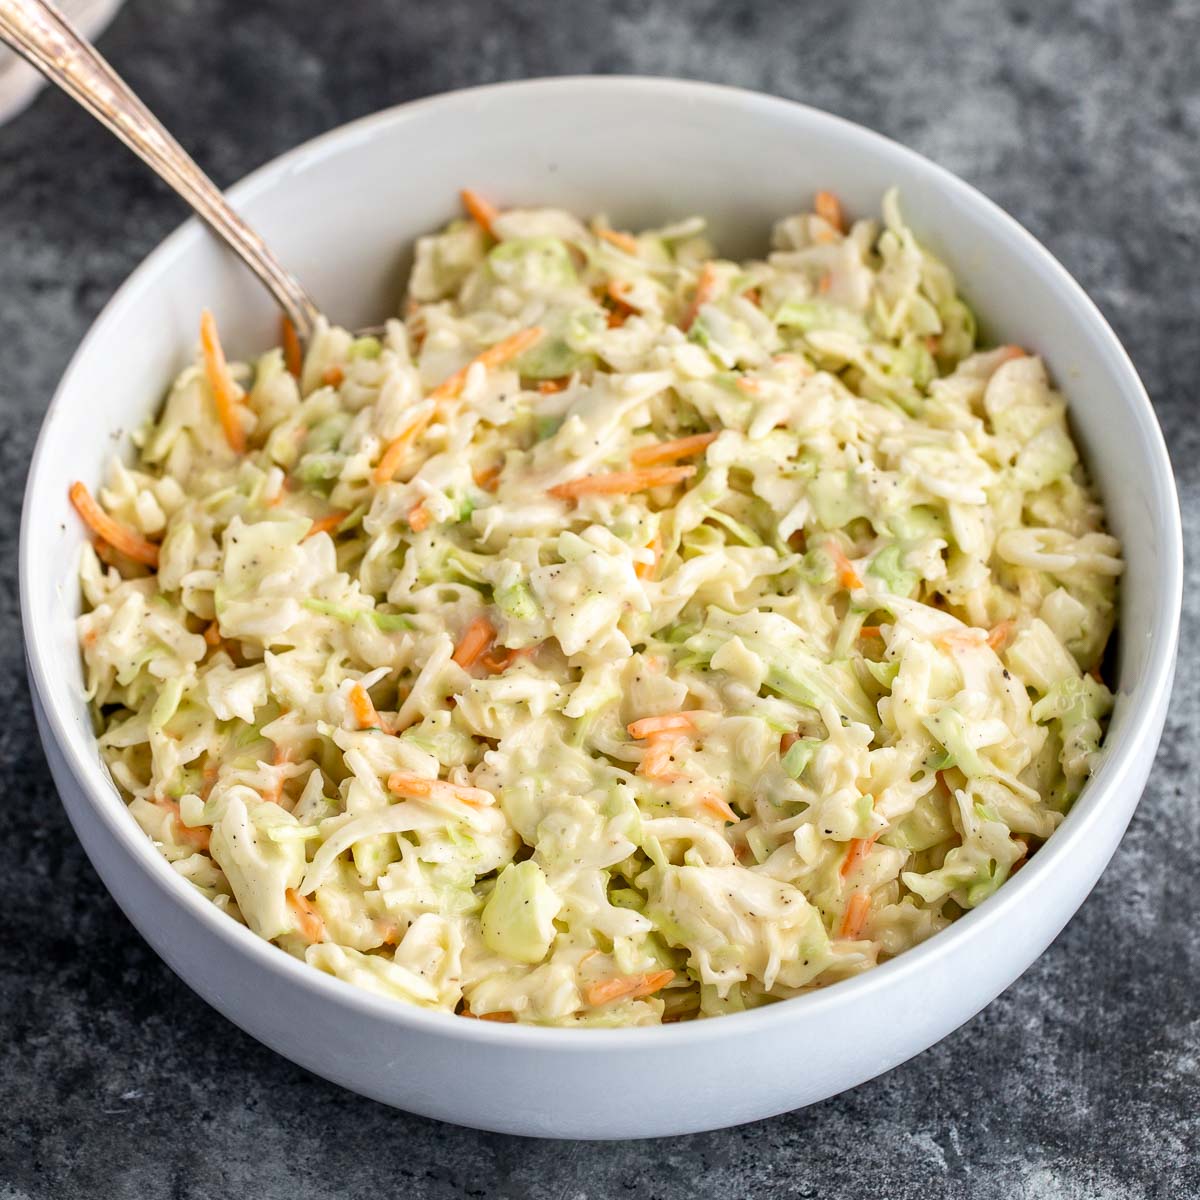 A large bowl filled with coleslaw that has been mixed with the dressing and ready to be served.